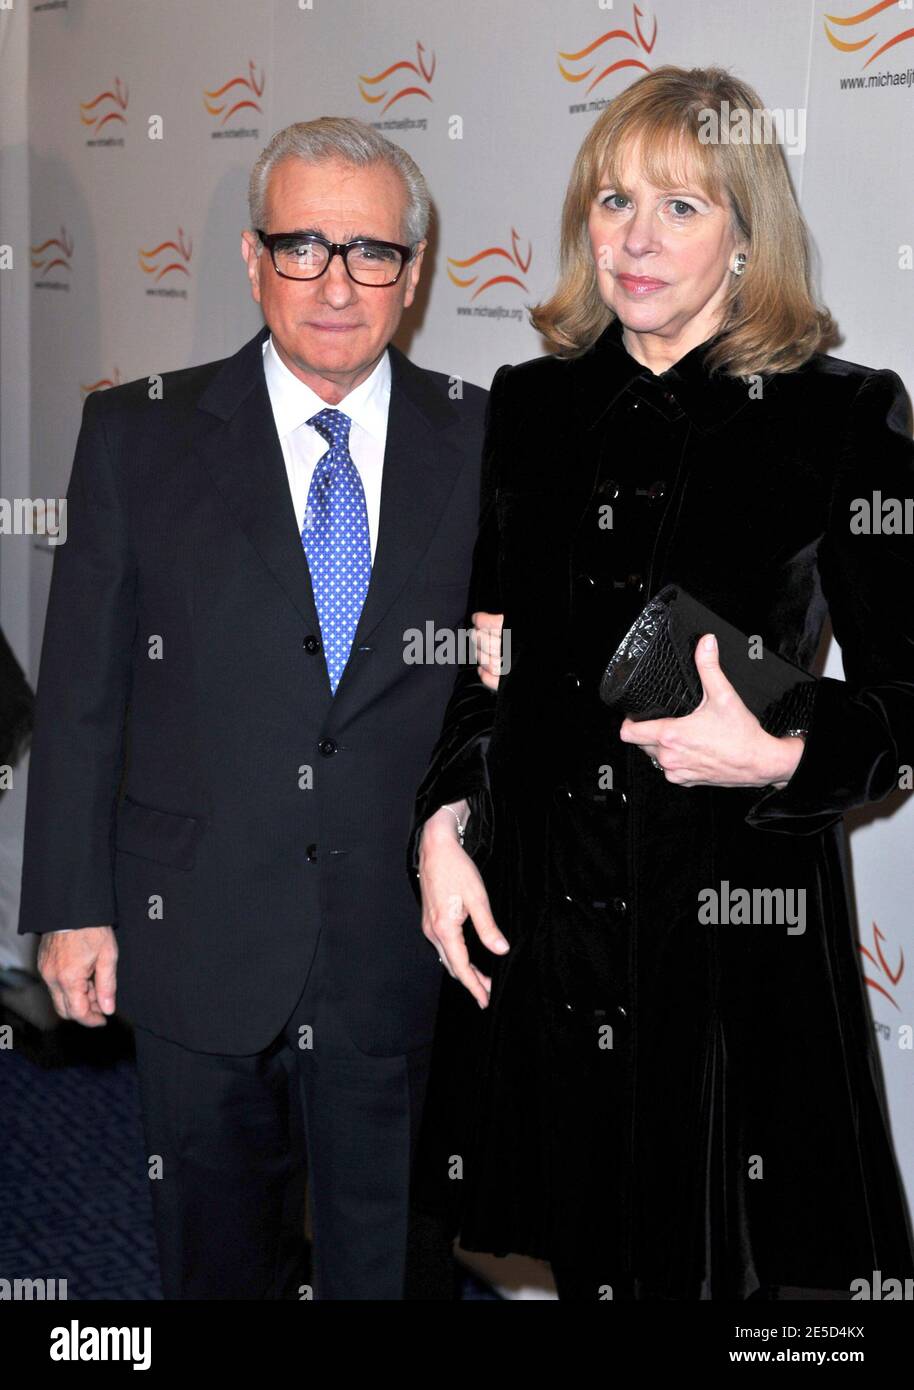 Director Martin Scorsese and wife Helen attend the 'A Funny Thing Happened On The Way To Cure Parkinson's' 2008 Benefit For The Michael J. Fox Foundation held at Sheraton New York Hotel and Towers in New York City, USA on November 5, 2008. Photo by Gregorio Binuya/ABACAPRESS.COM Stock Photo